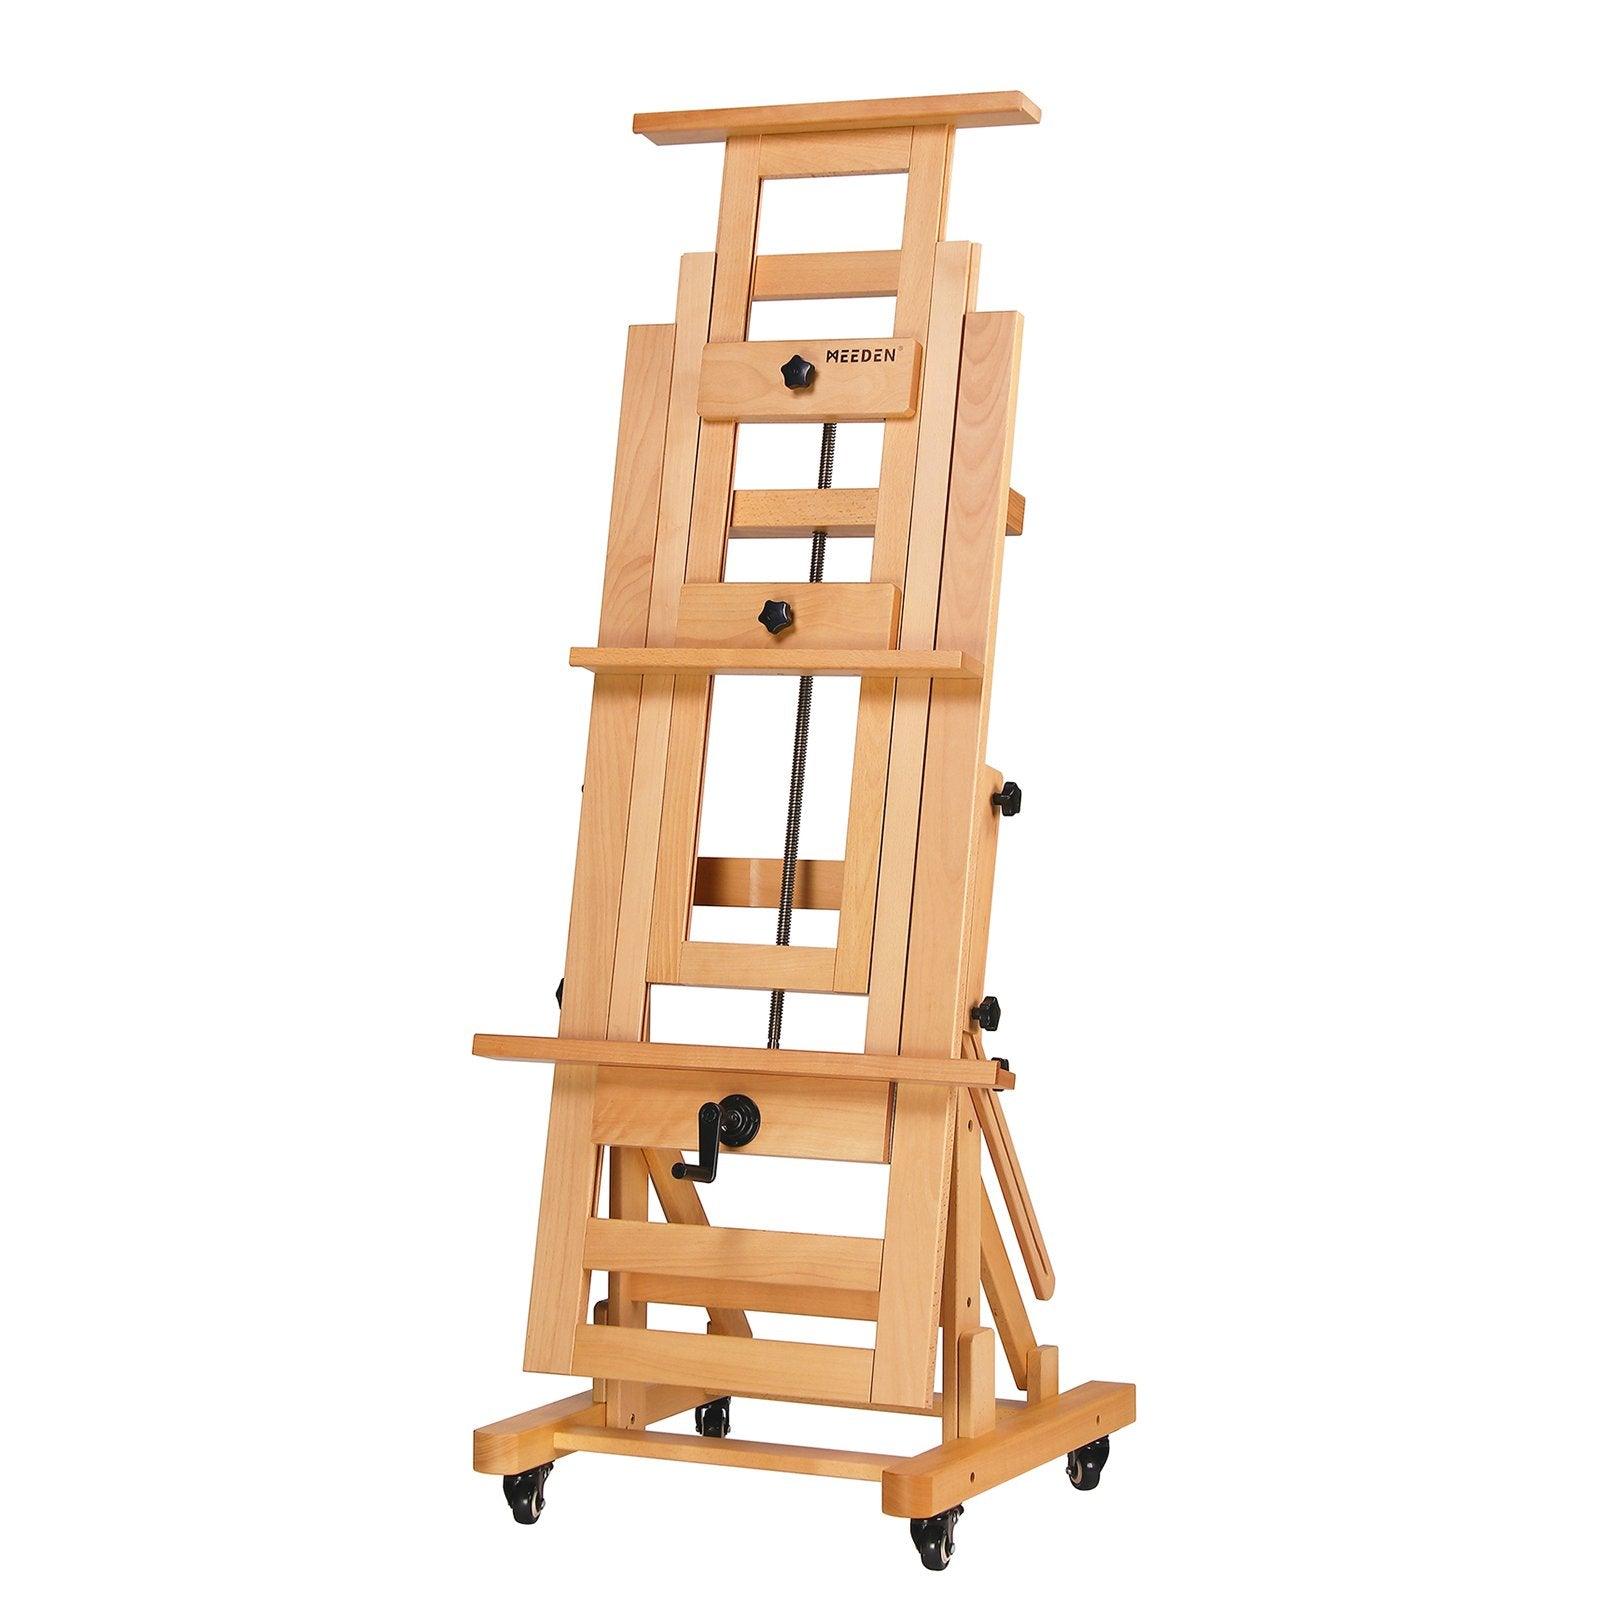 U.S. Art Supply 16 Mini Tabletop Wooden H-Frame Studio Easel (Pack of 6) -  Adjustable Beechwood Painting and Display Easel, Holds Up To 12 Canvas